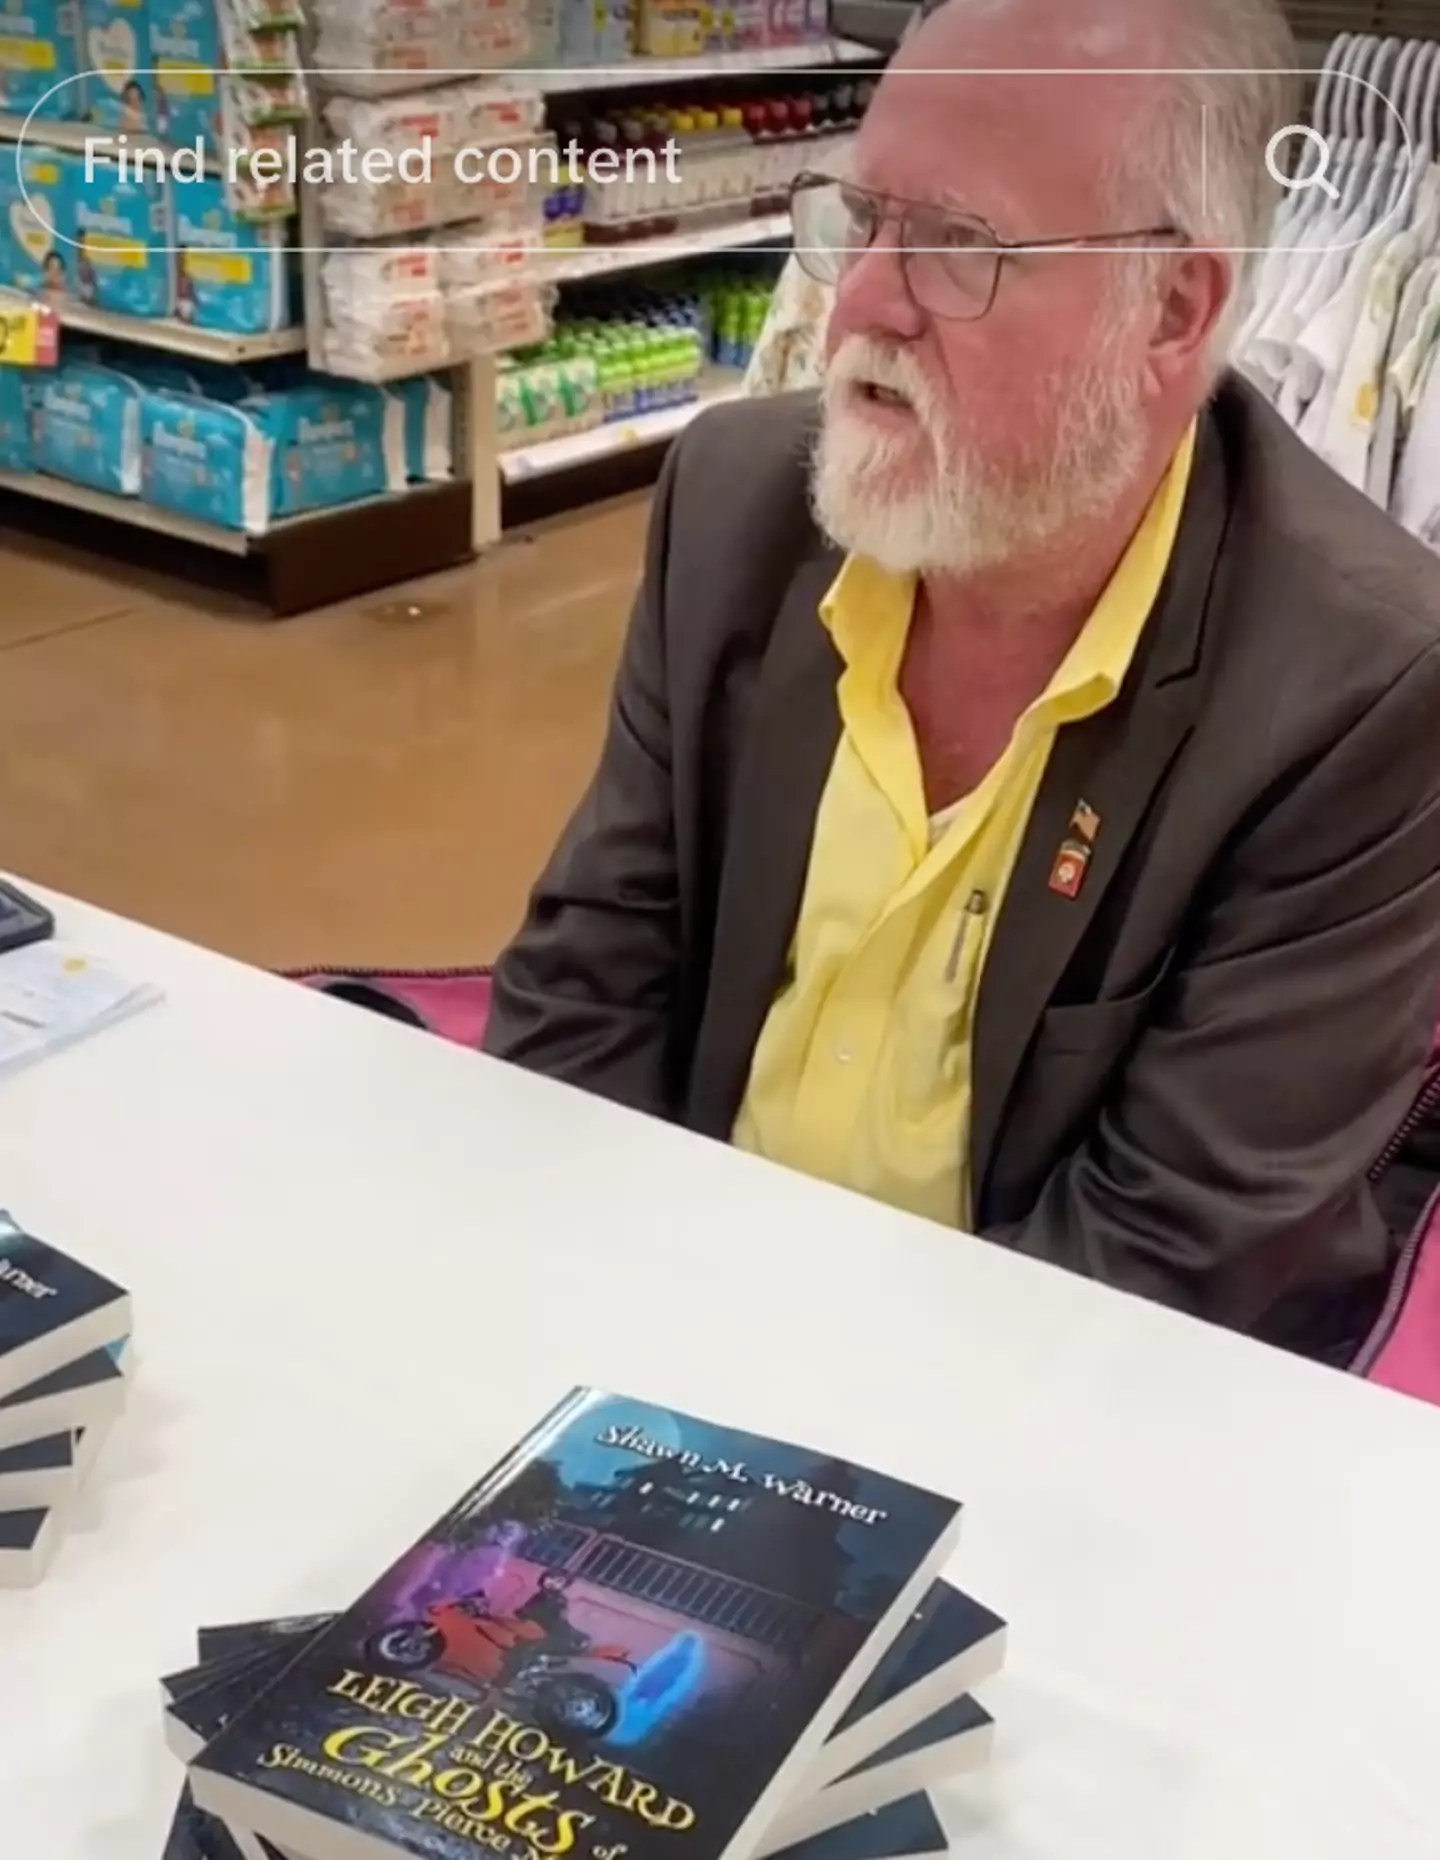 Shawn Warner was spotted sitting alone at his book signing.